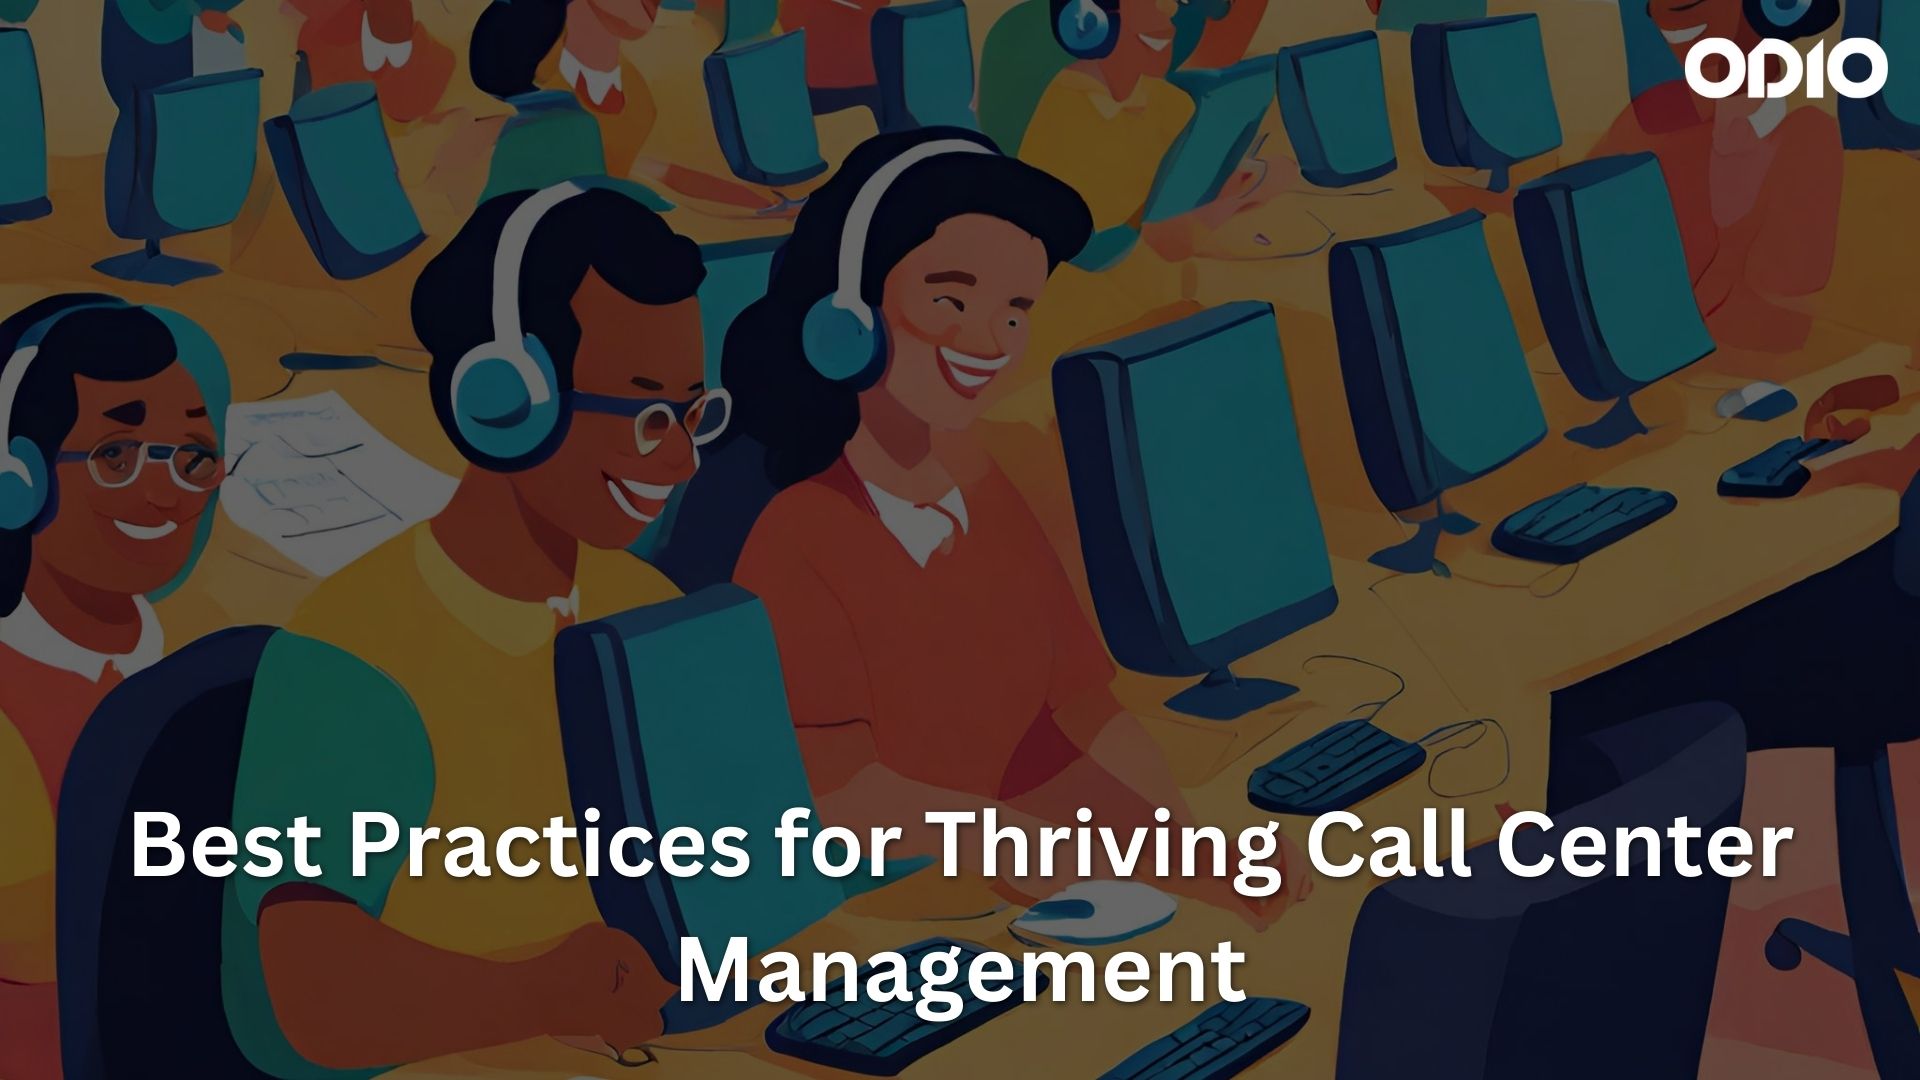 Image showing positive environment in contact center to emphasize on call center management